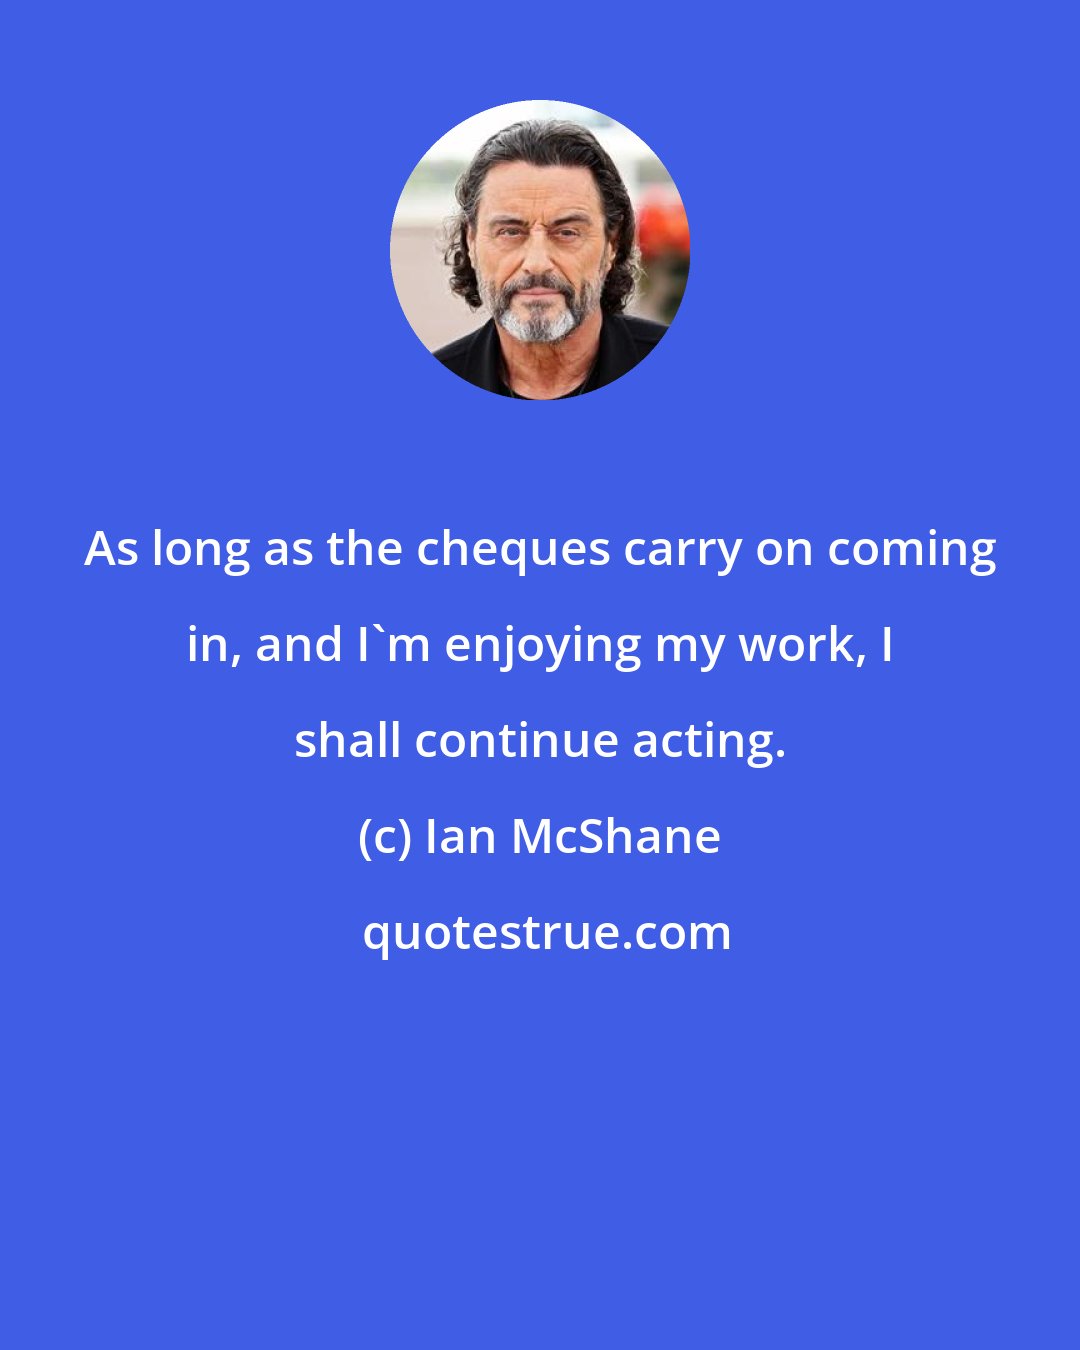 Ian McShane: As long as the cheques carry on coming in, and I'm enjoying my work, I shall continue acting.